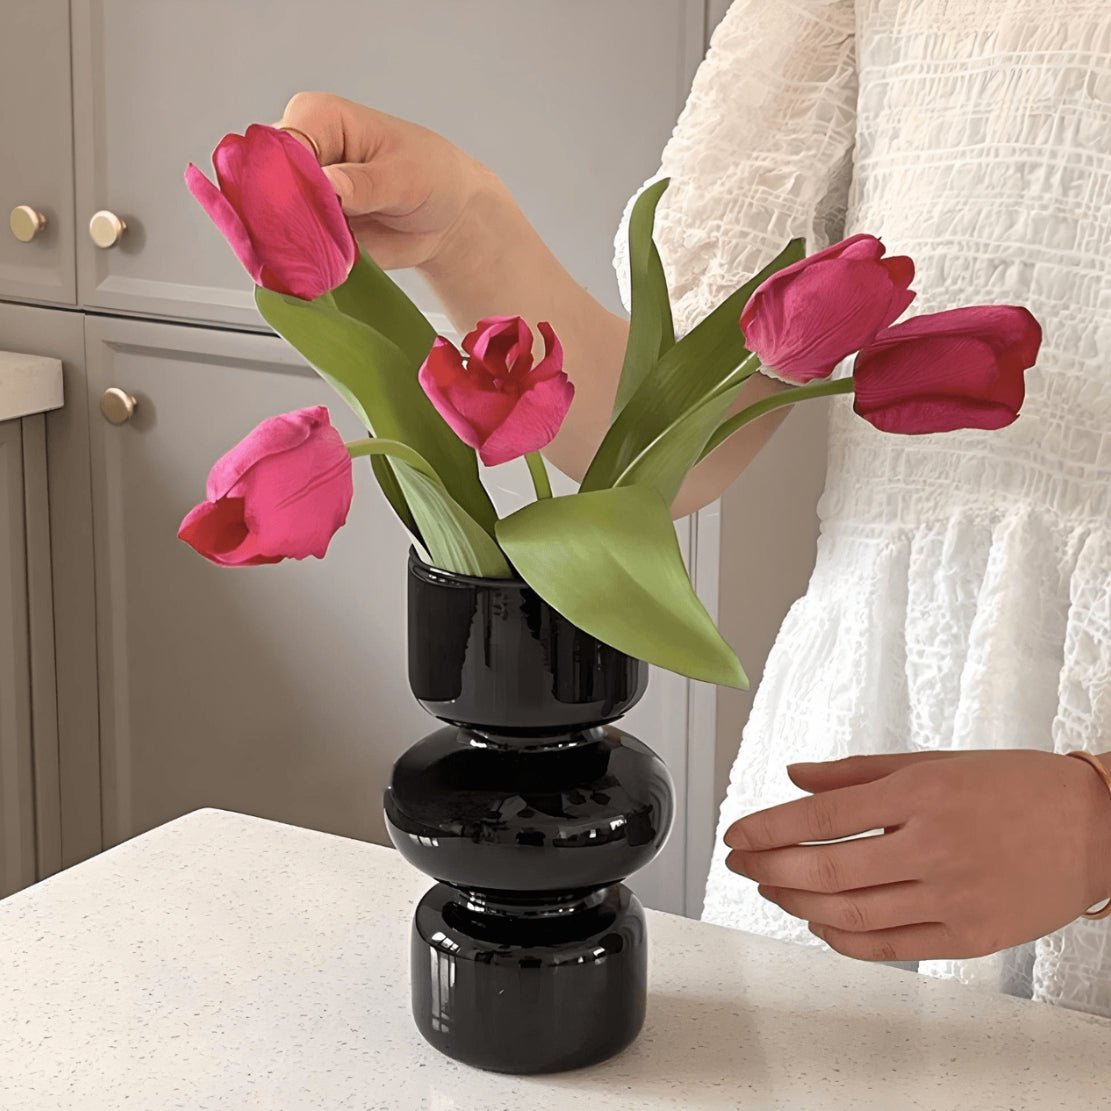 Black, geometric ball glass vase with pink tulip flowers